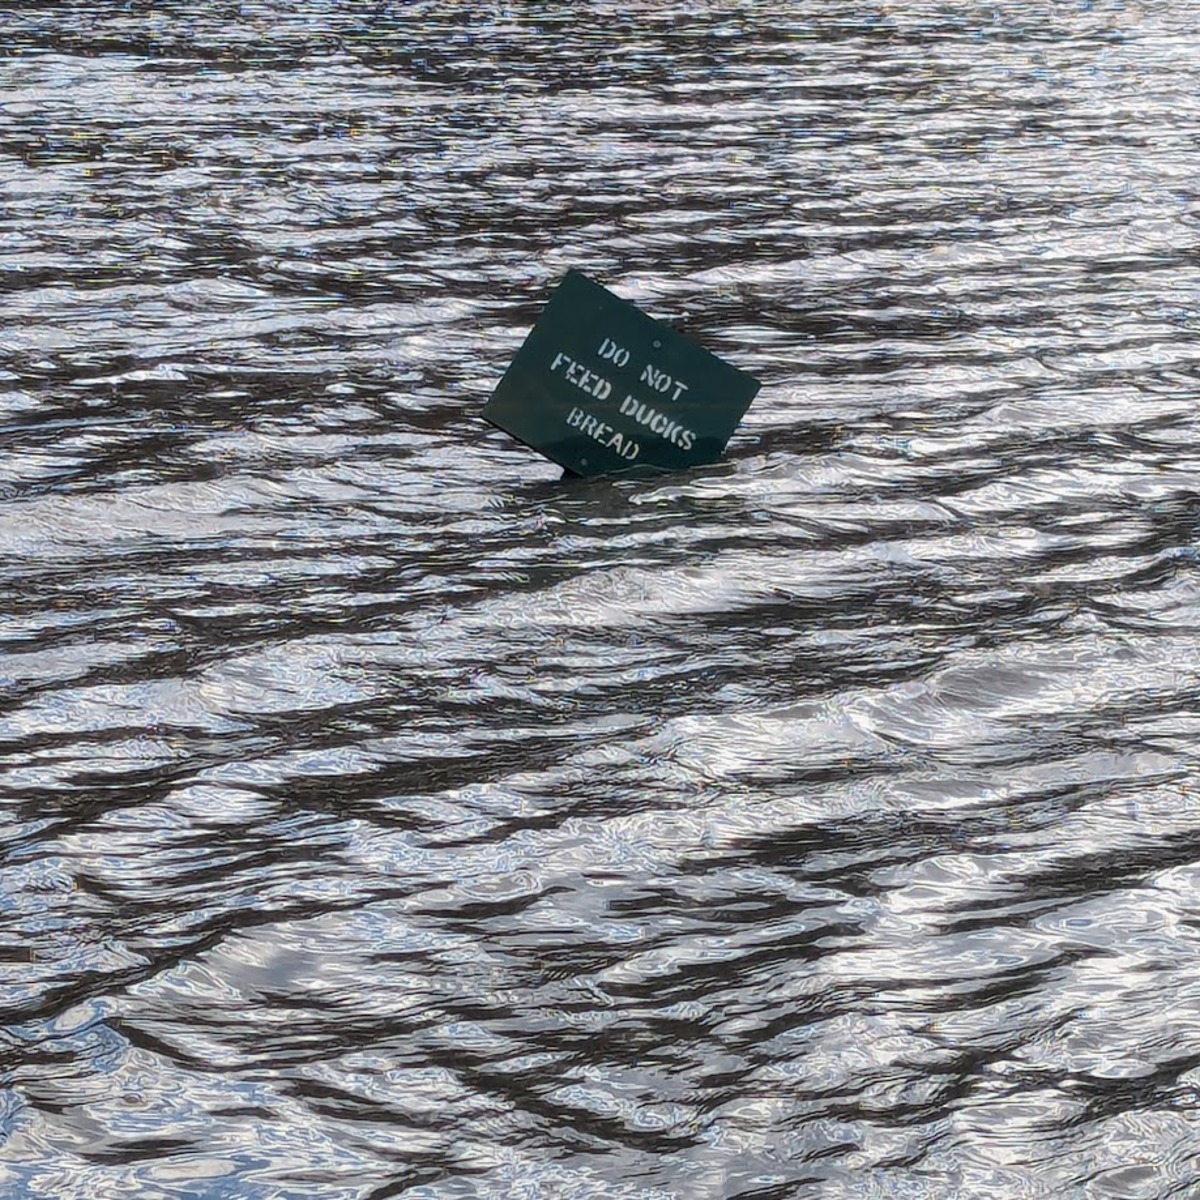 A green sign partly submerged in water, tilted at a 45 degree angle with white letters reading 'DO NOT FEED DUCKS BREAD'